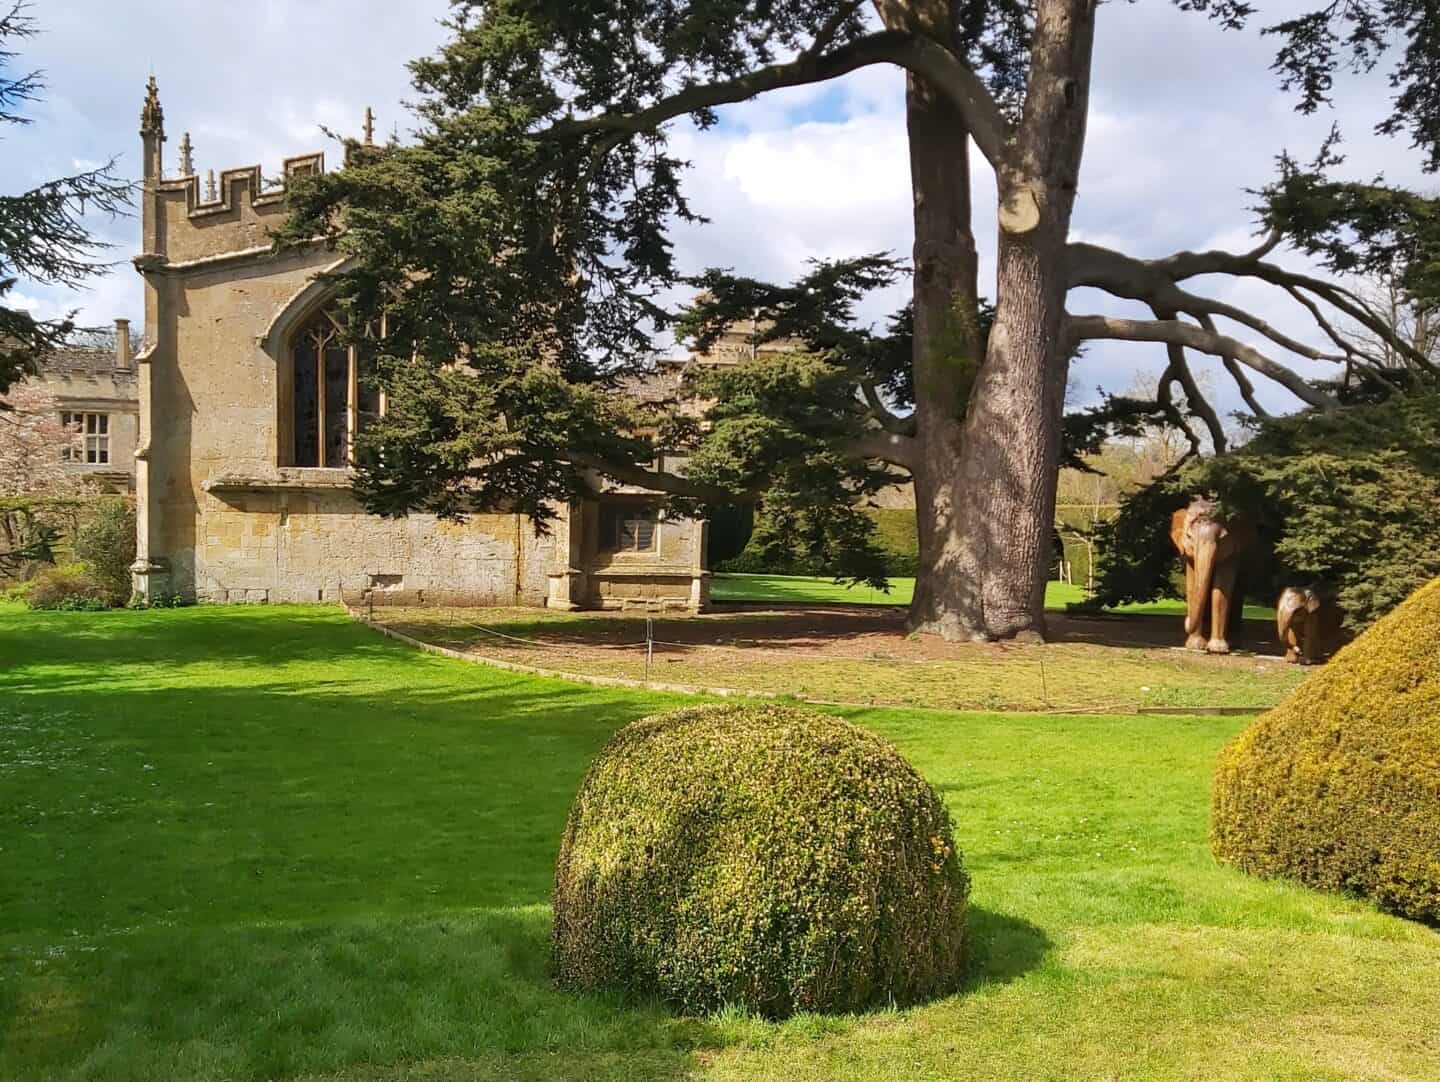 Elephants under a tree by St Mary's Church in Sudeley Castle Gardens